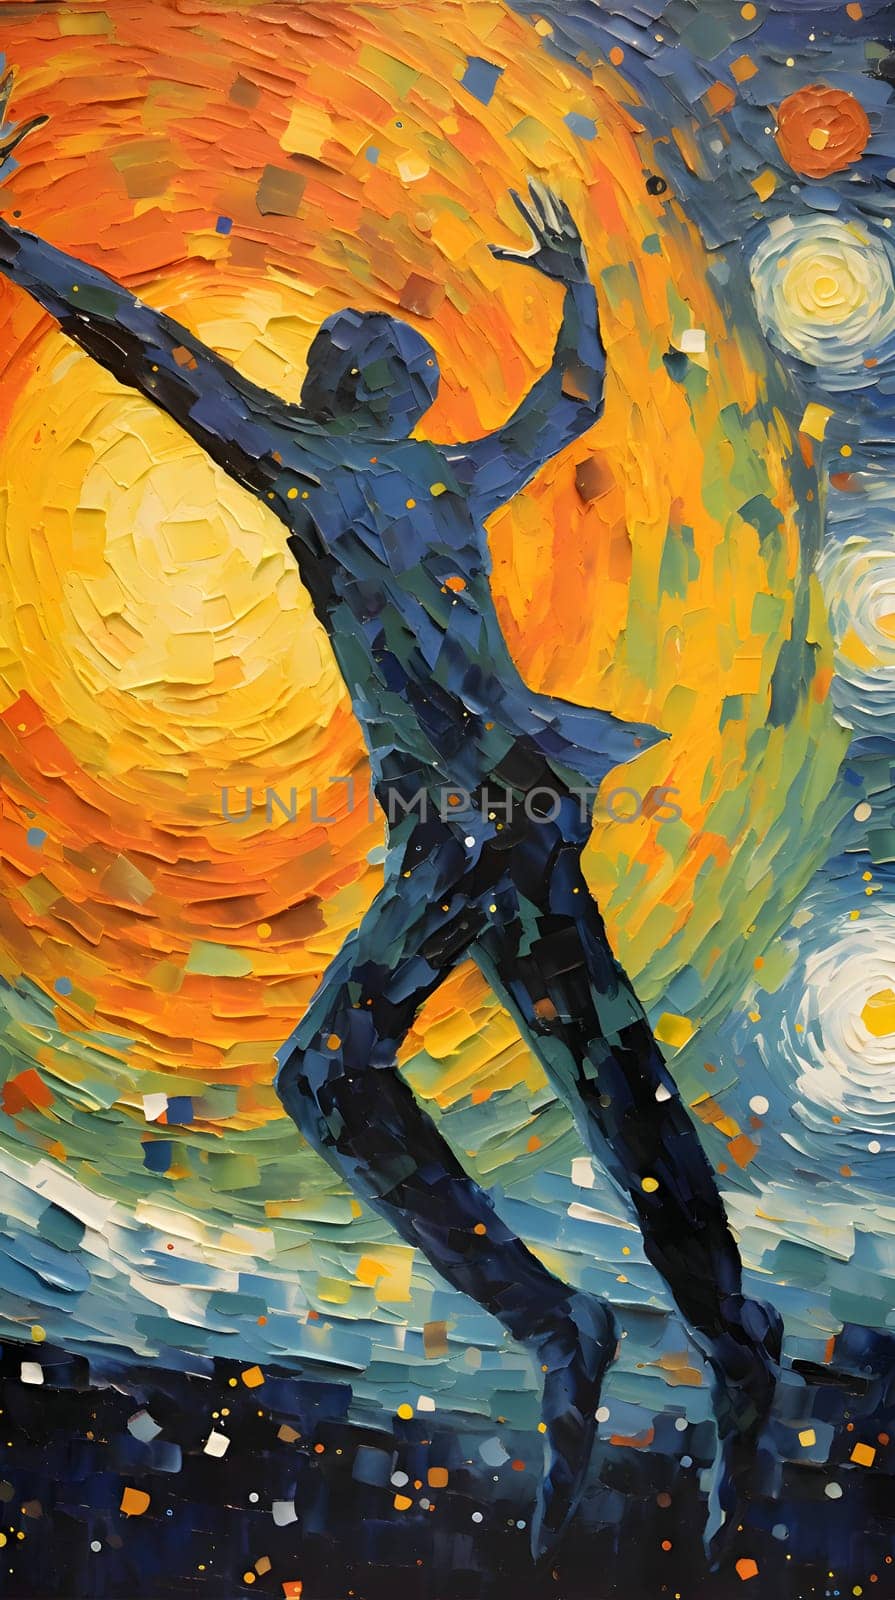 Abstract illustration: Abstract oil painting of a ballerina dancing on a colorful background